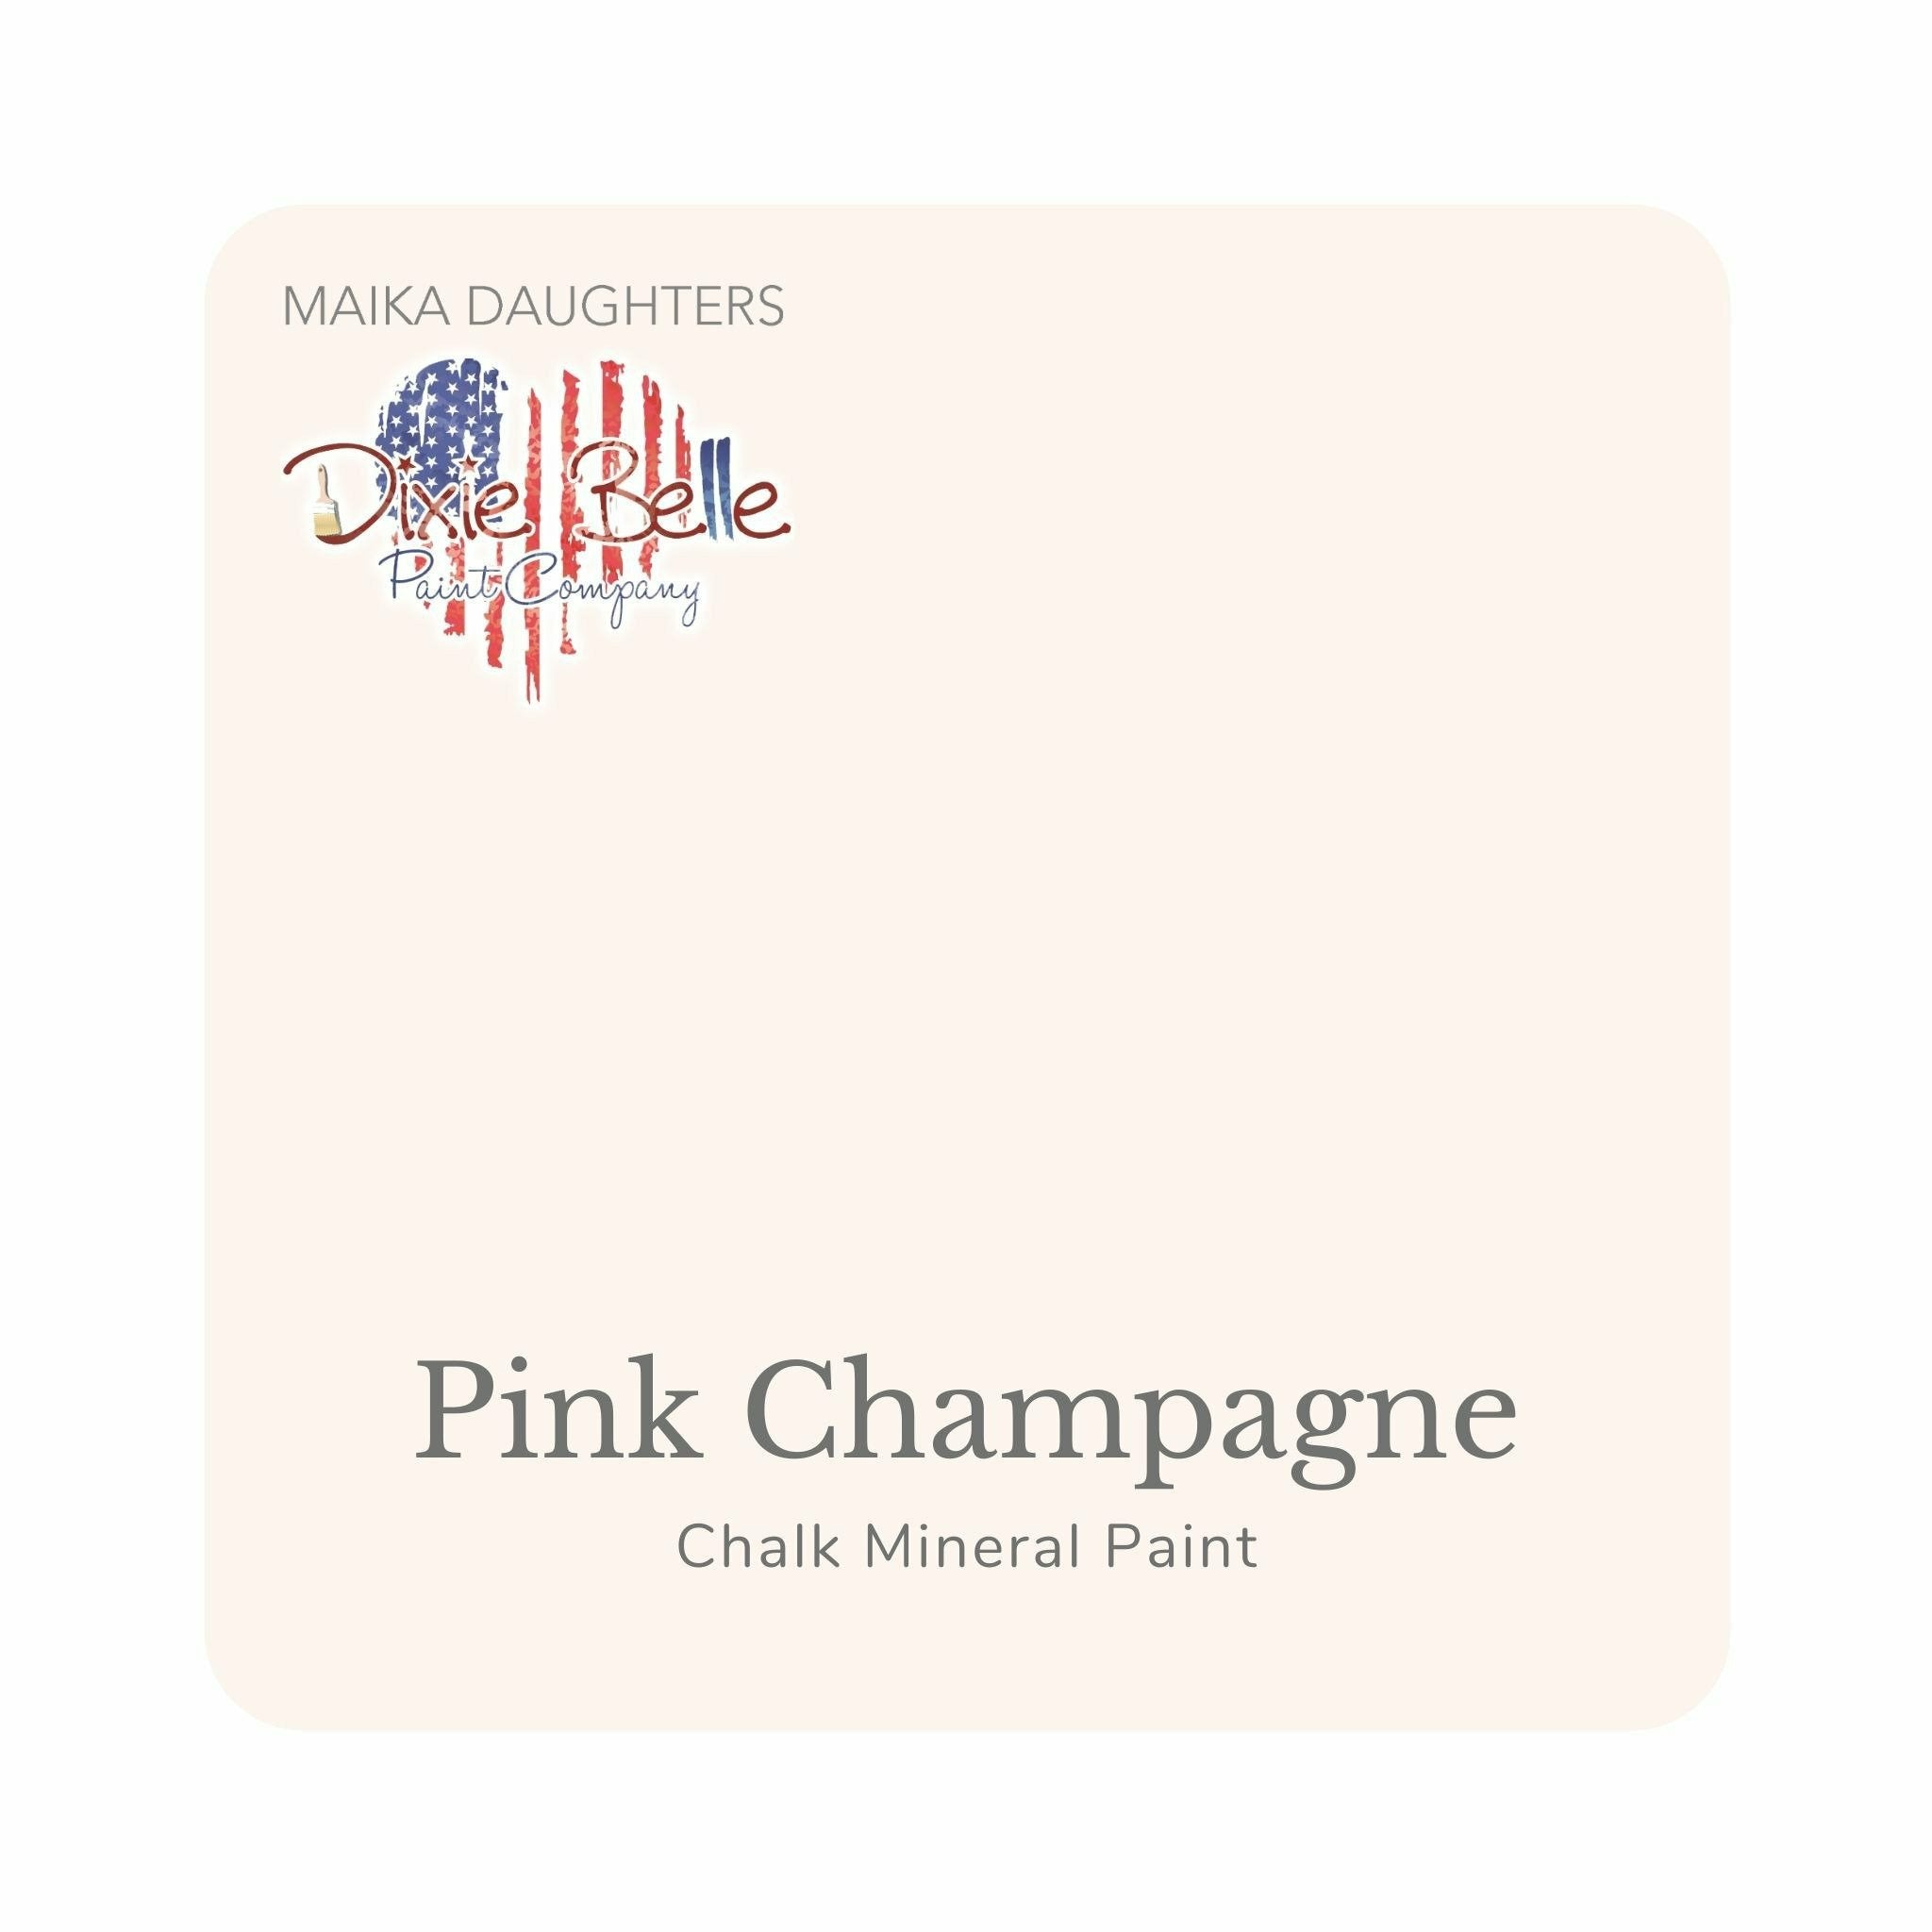 A square swatch card of Dixie Belle Paint Company’s Pink Champagne Chalk Mineral Paint is against a white background. This color is a pale soft pink.